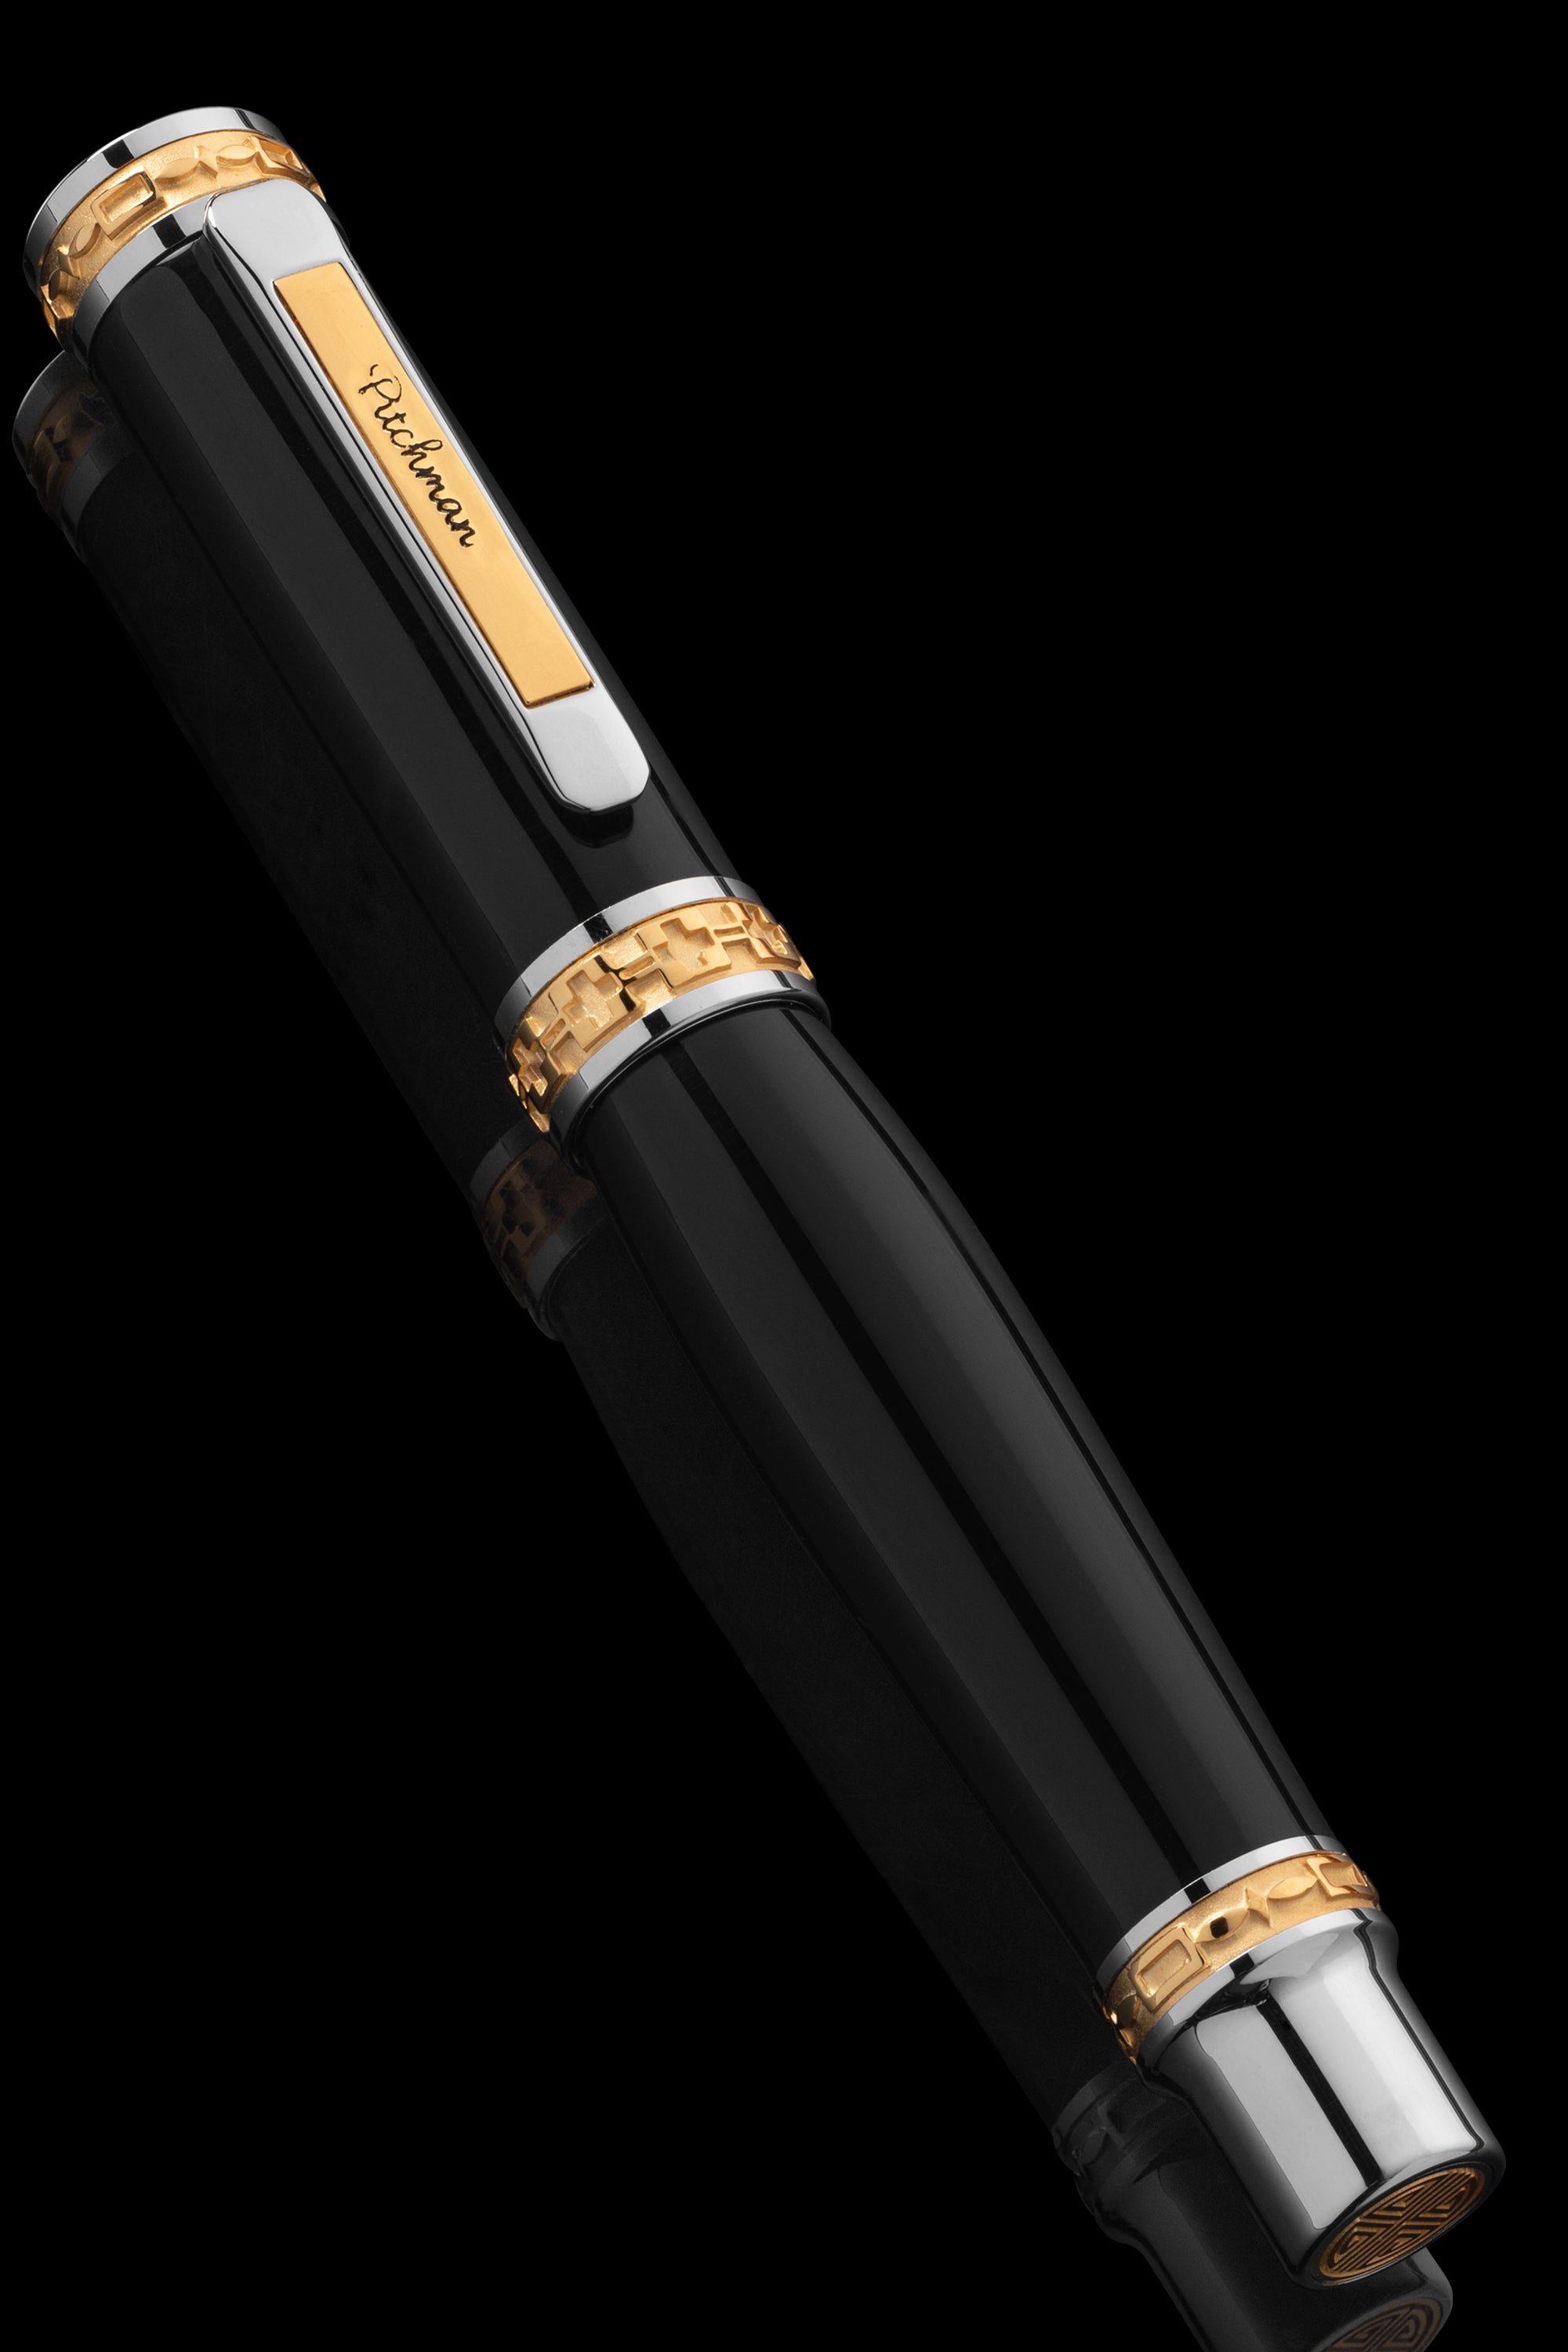 Pitchman Closer Rollerball Pen: Handcrafted American-made, heavy, and fancy. Perfect high-end gift for the person who has everything.